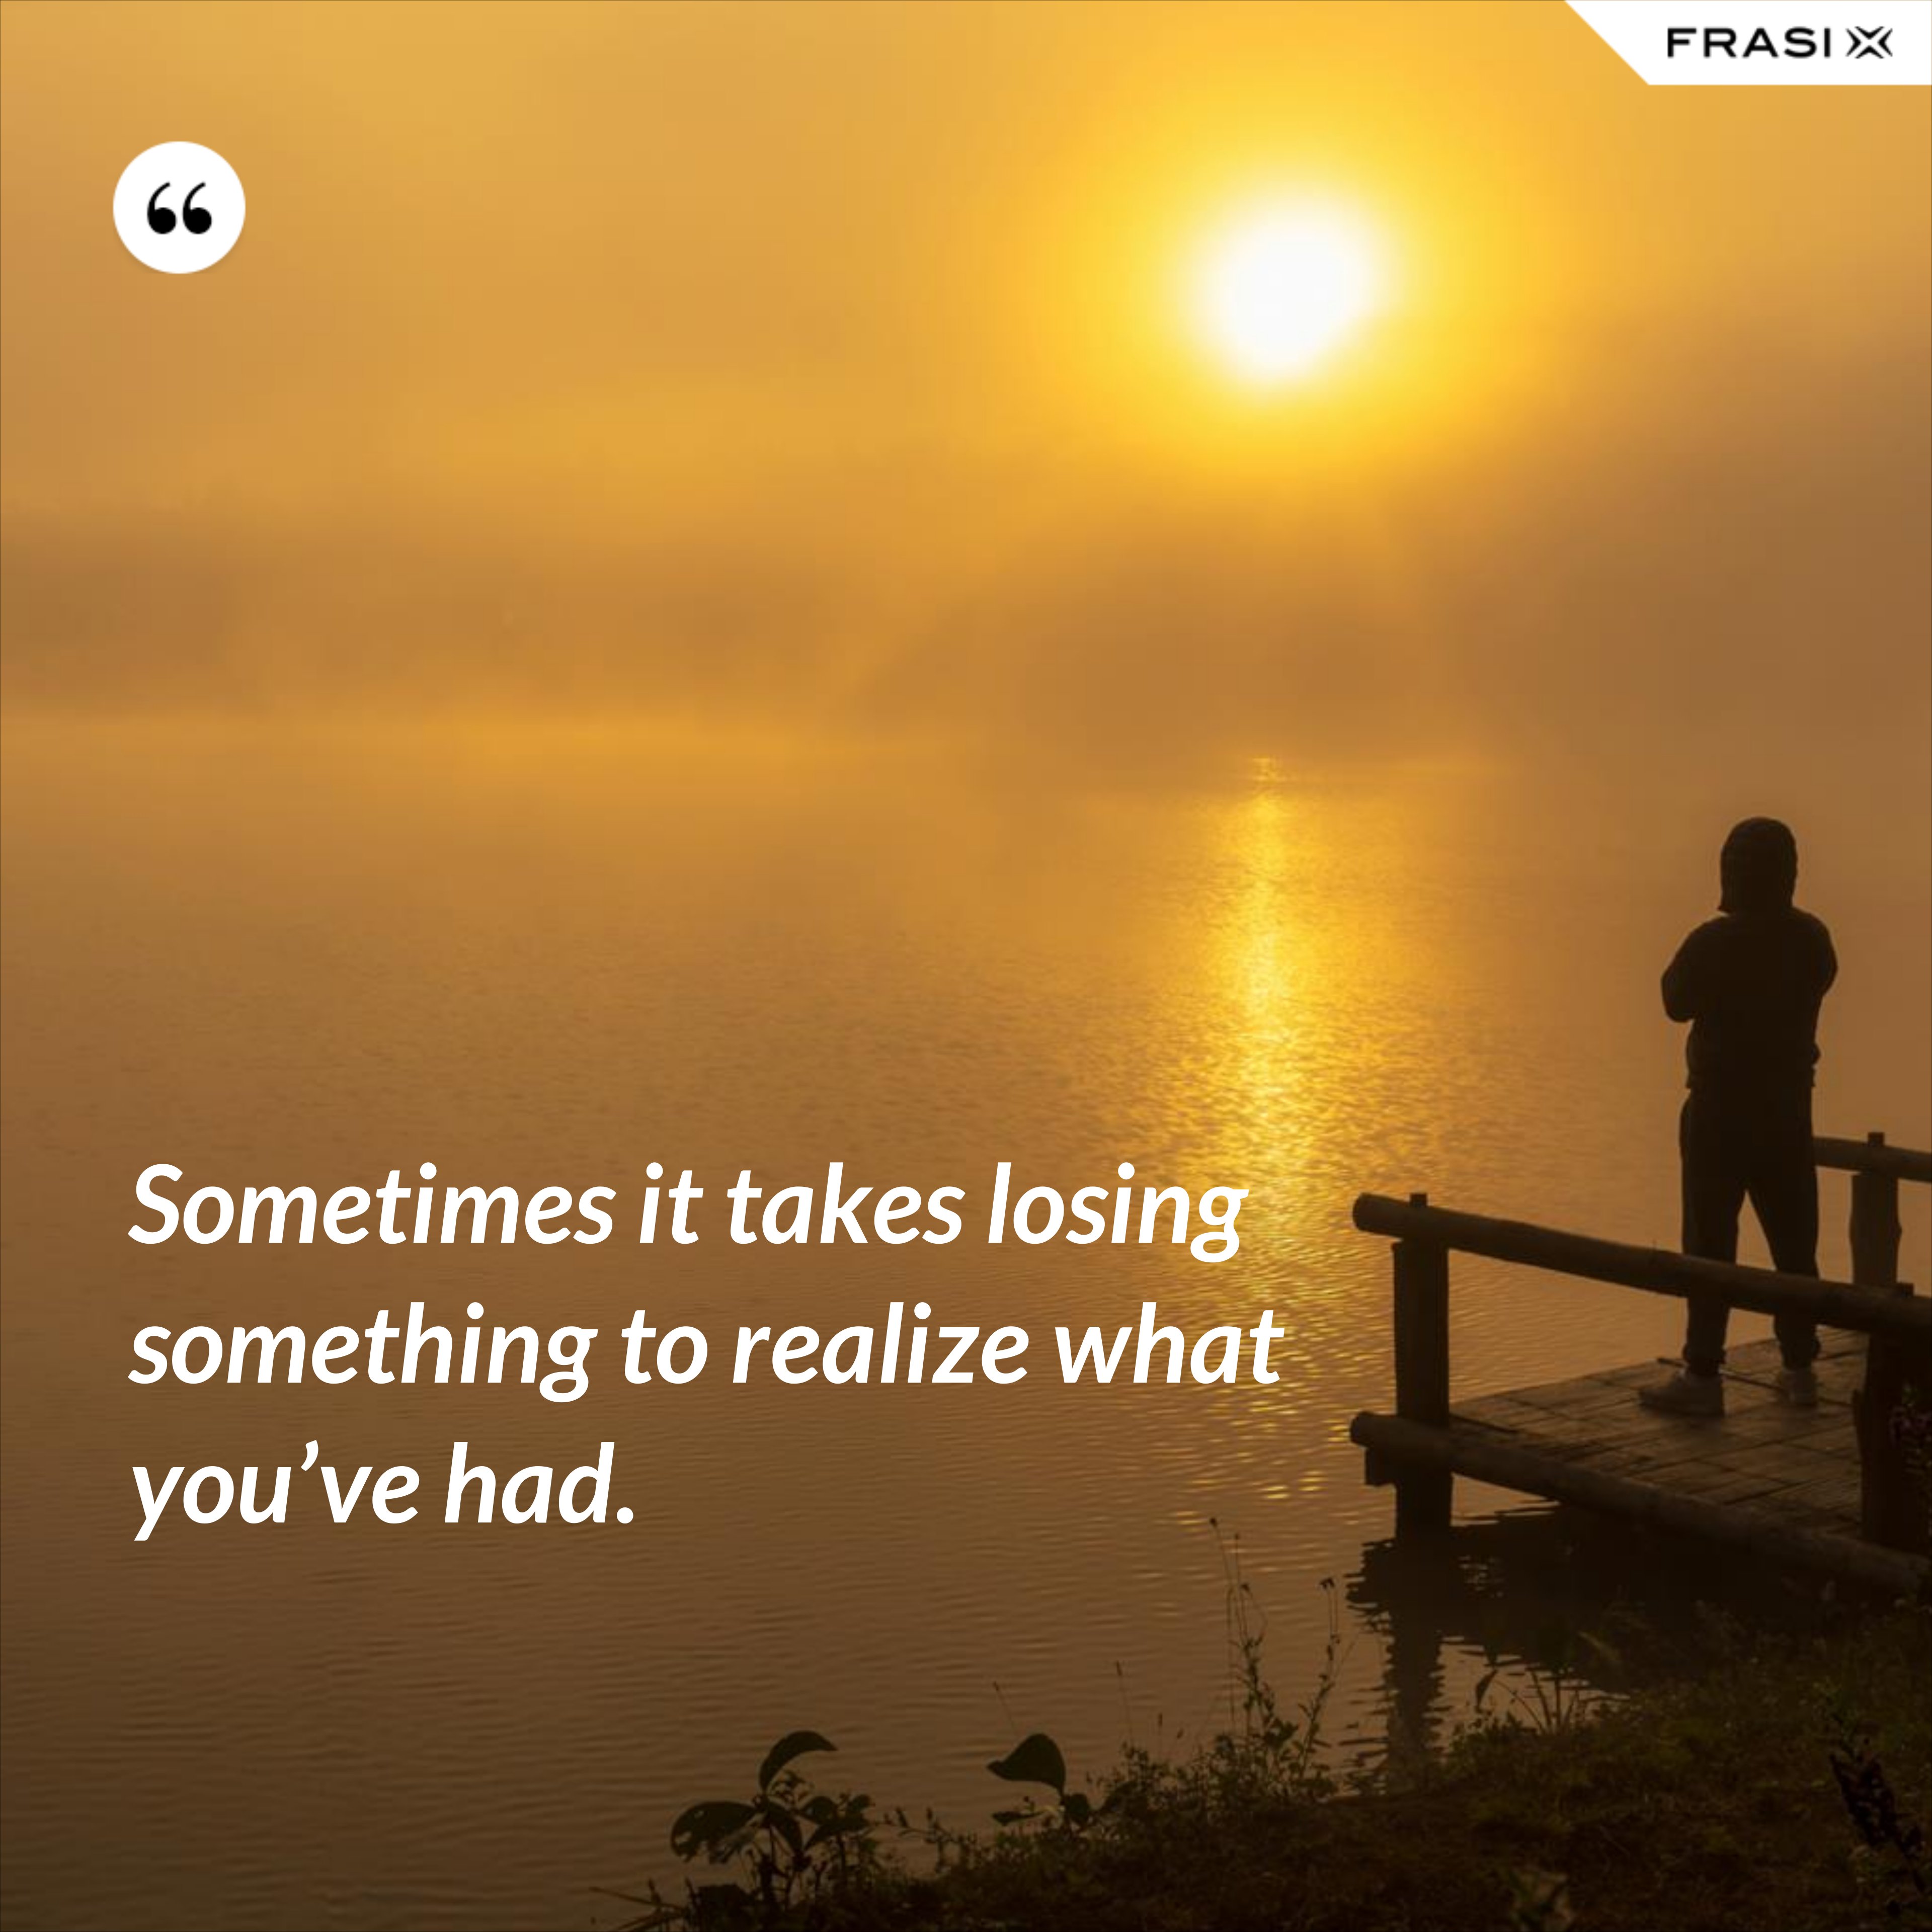 Sometimes it takes losing something to realize what you’ve had. - Anonimo